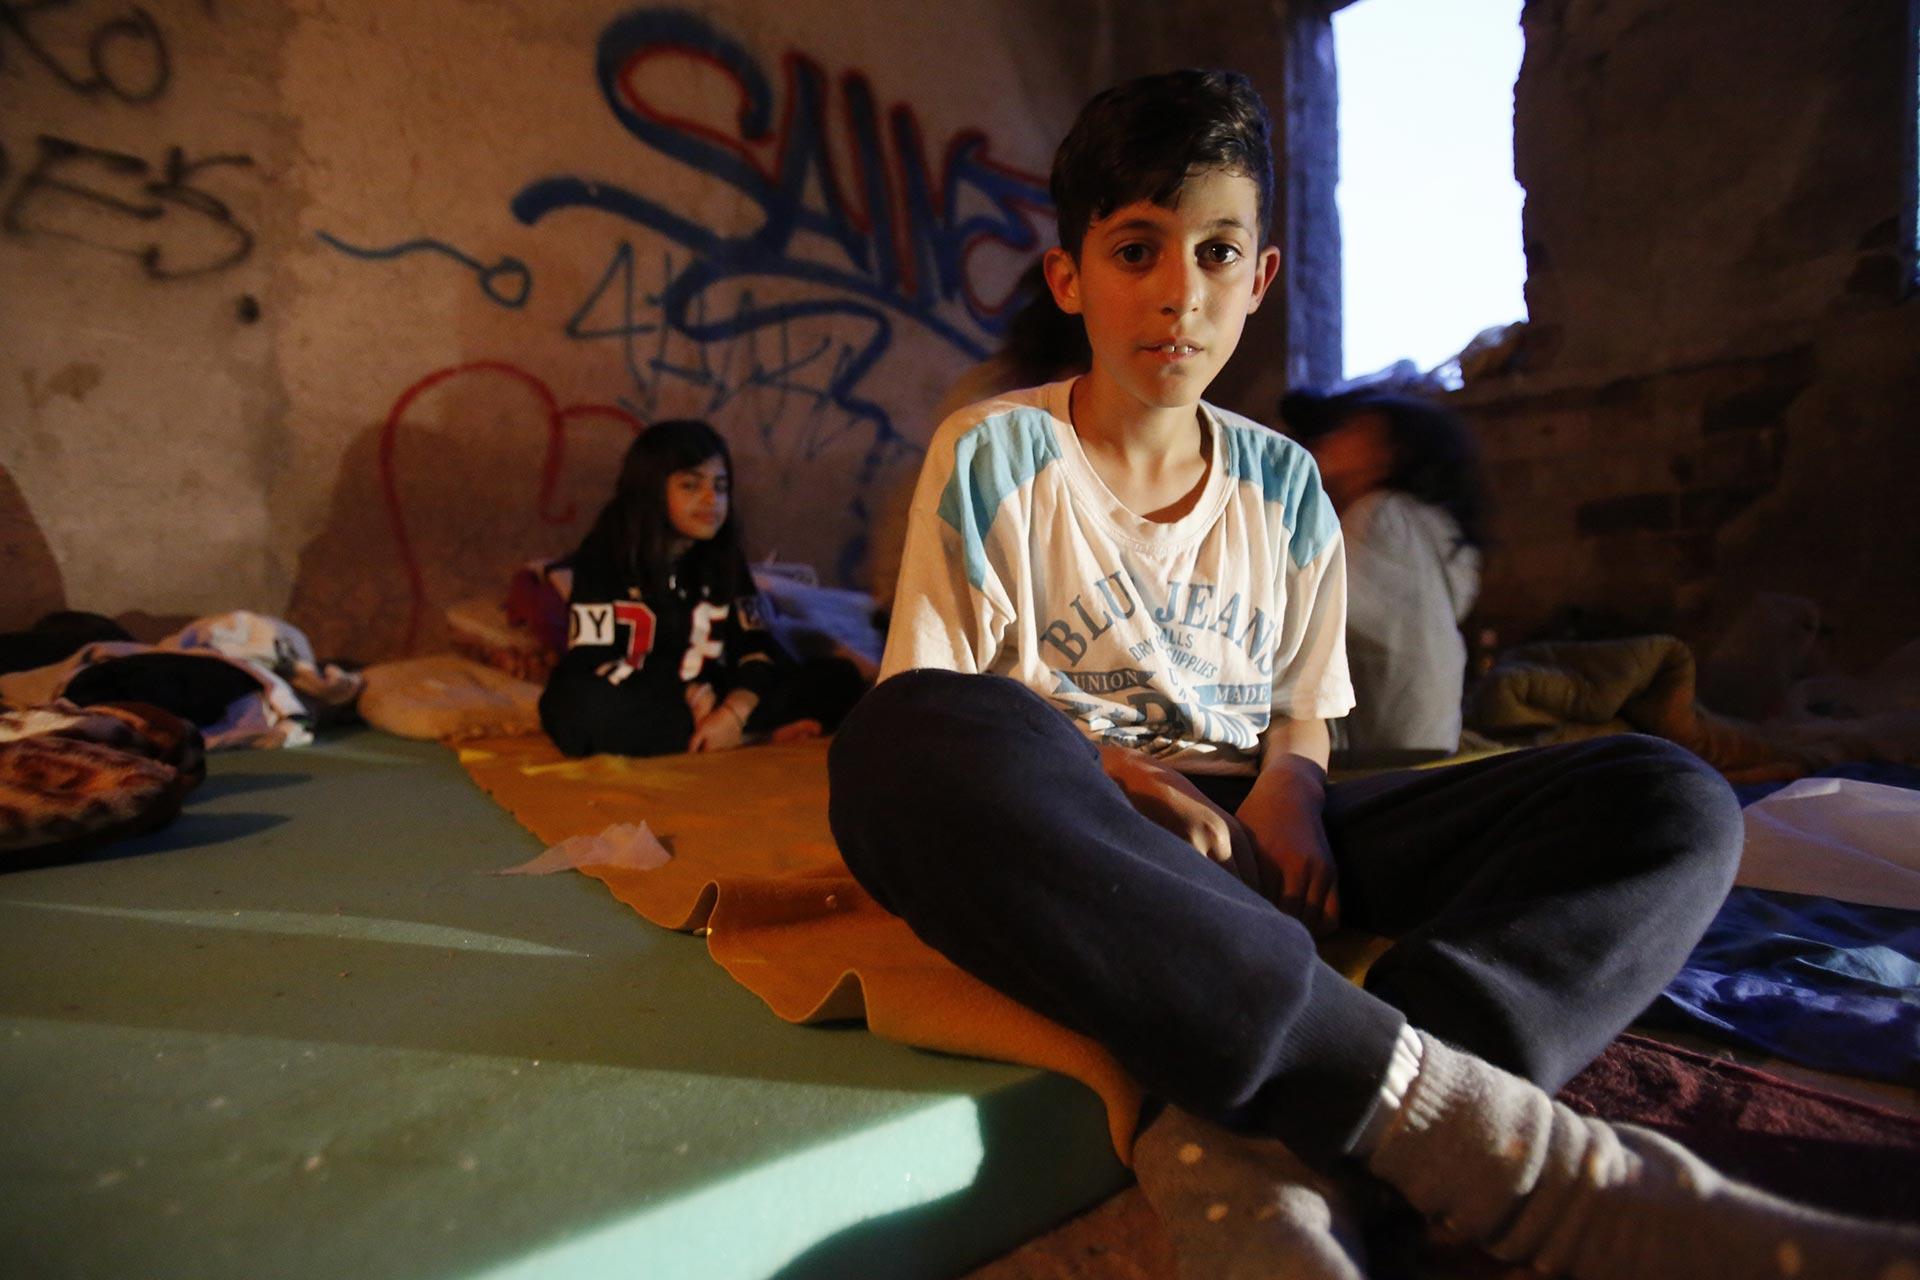 A young Afghan boy sits on a makeshift bed in the northwestern Bosnian town of Bihac.